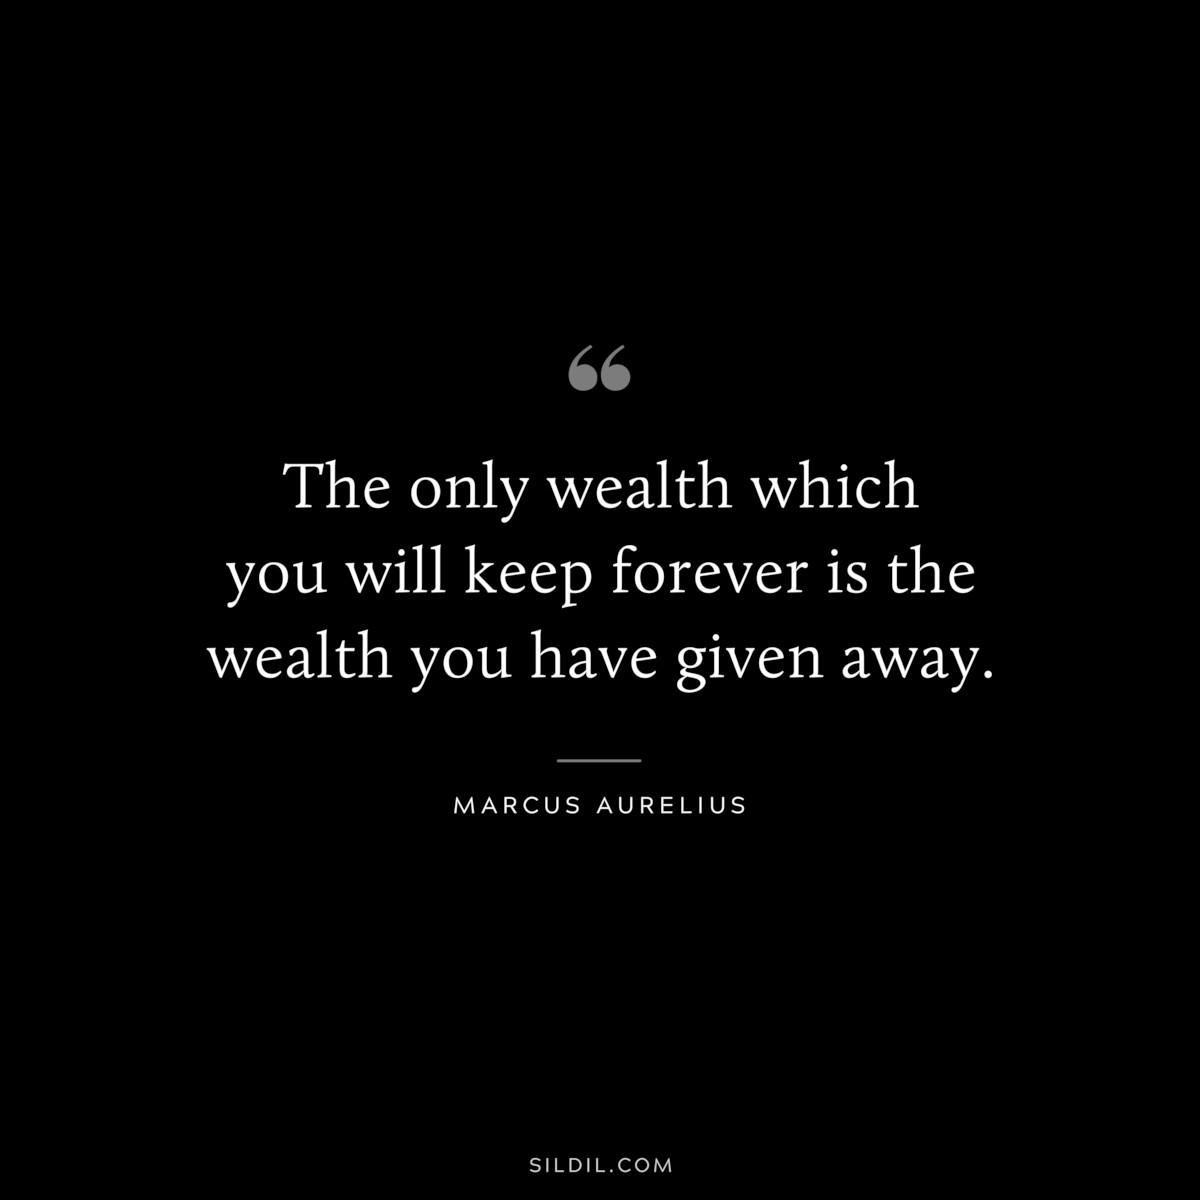 The only wealth which you will keep forever is the wealth you have given away. ― Marcus Aurelius